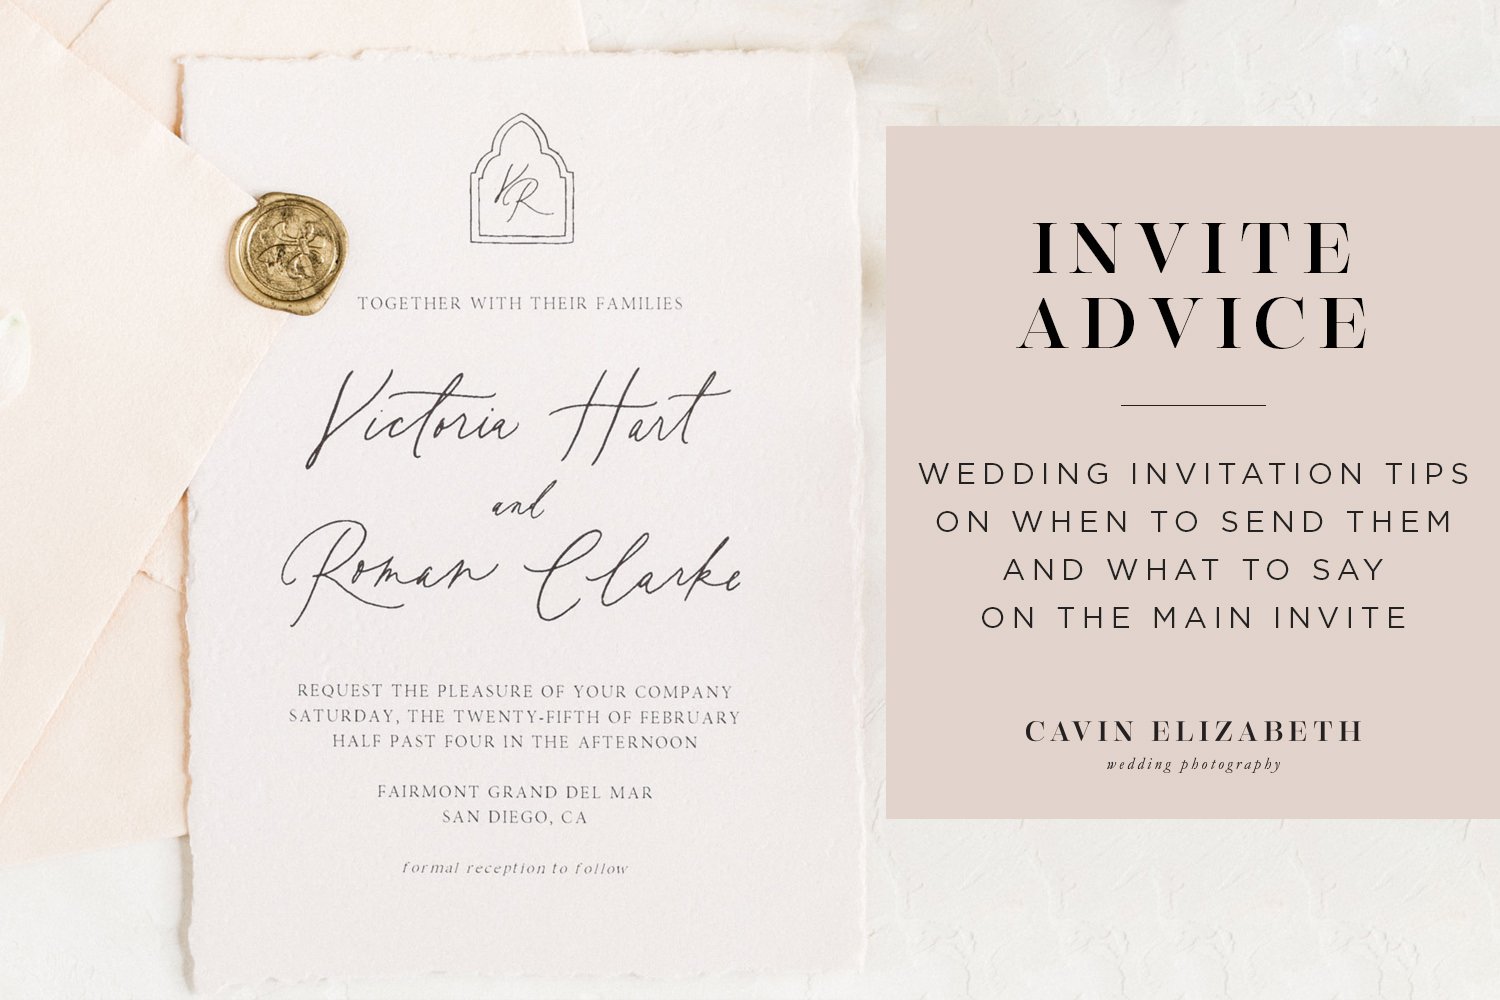 Wedding Invitation Tips + Advice on When to Send and What ...